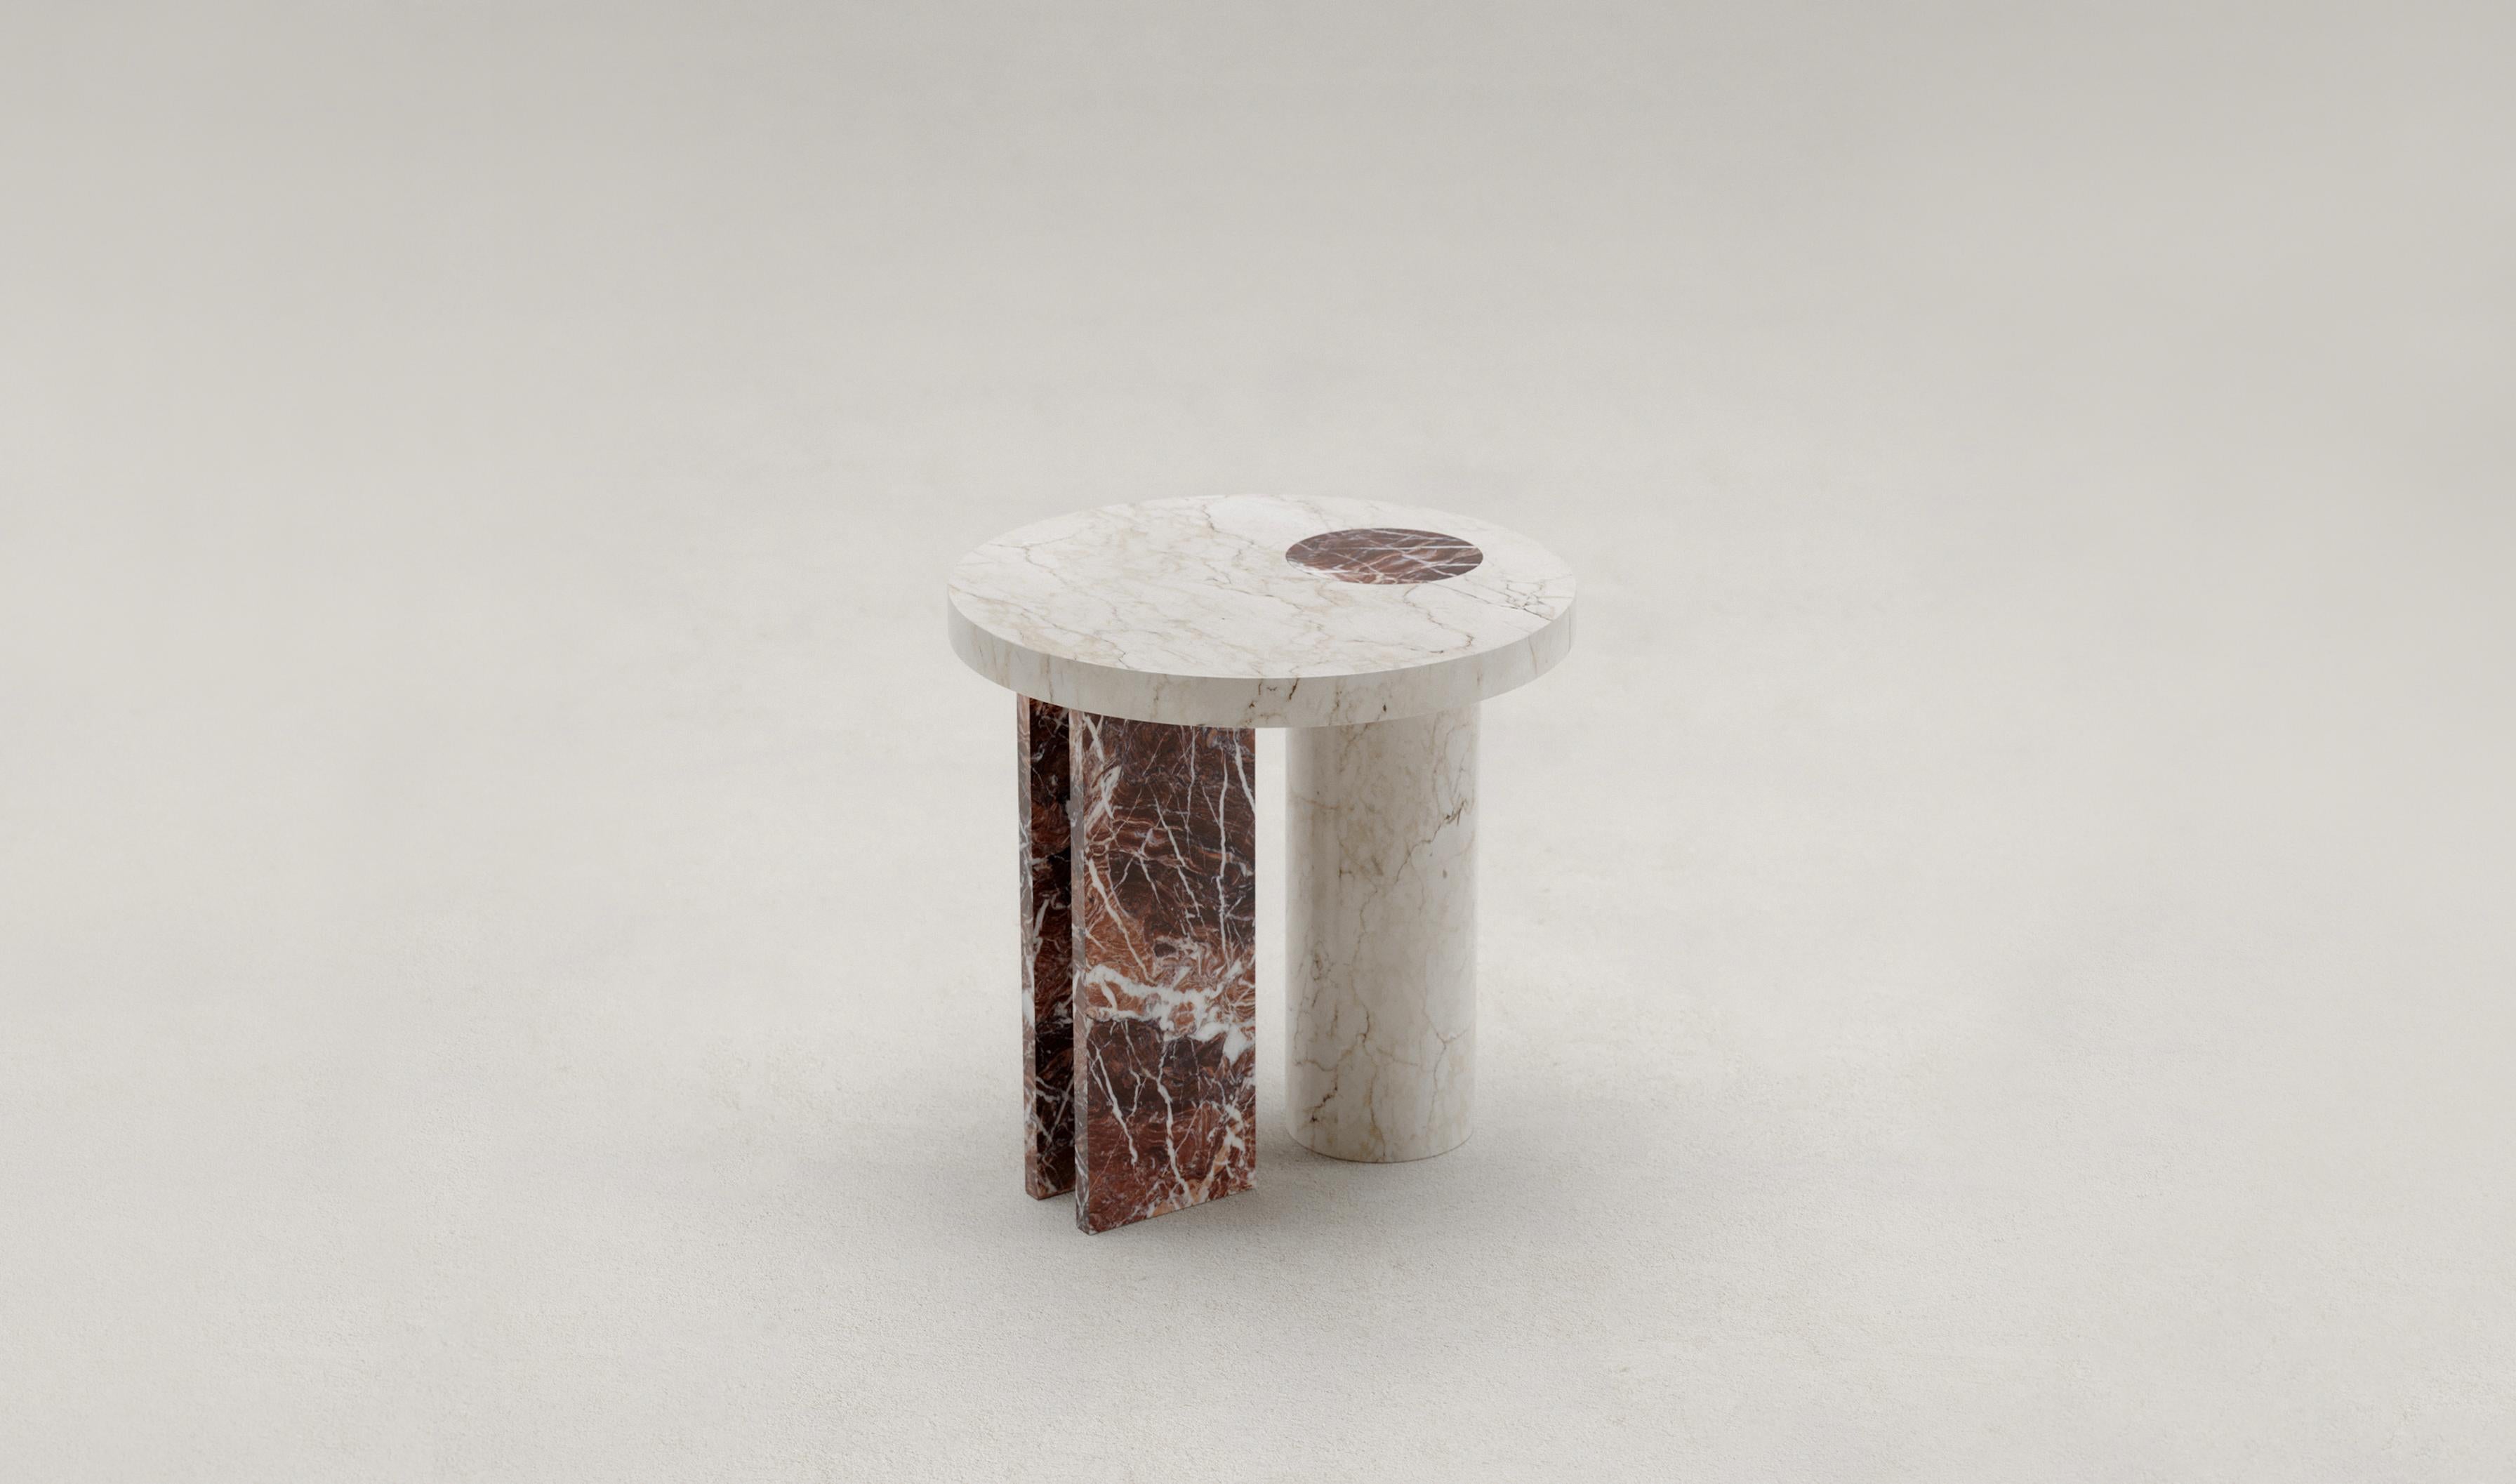 Salvante S1 side table by Piotr Dabrowa
Unique Piece
Dimensions: D 50 x H 50 cm
Materials: Calacatta marble. Rosa Peralba marble.
Also available: Calacatta Viola marble, walnut Burl.

Salvante table collection is a play between shapes,